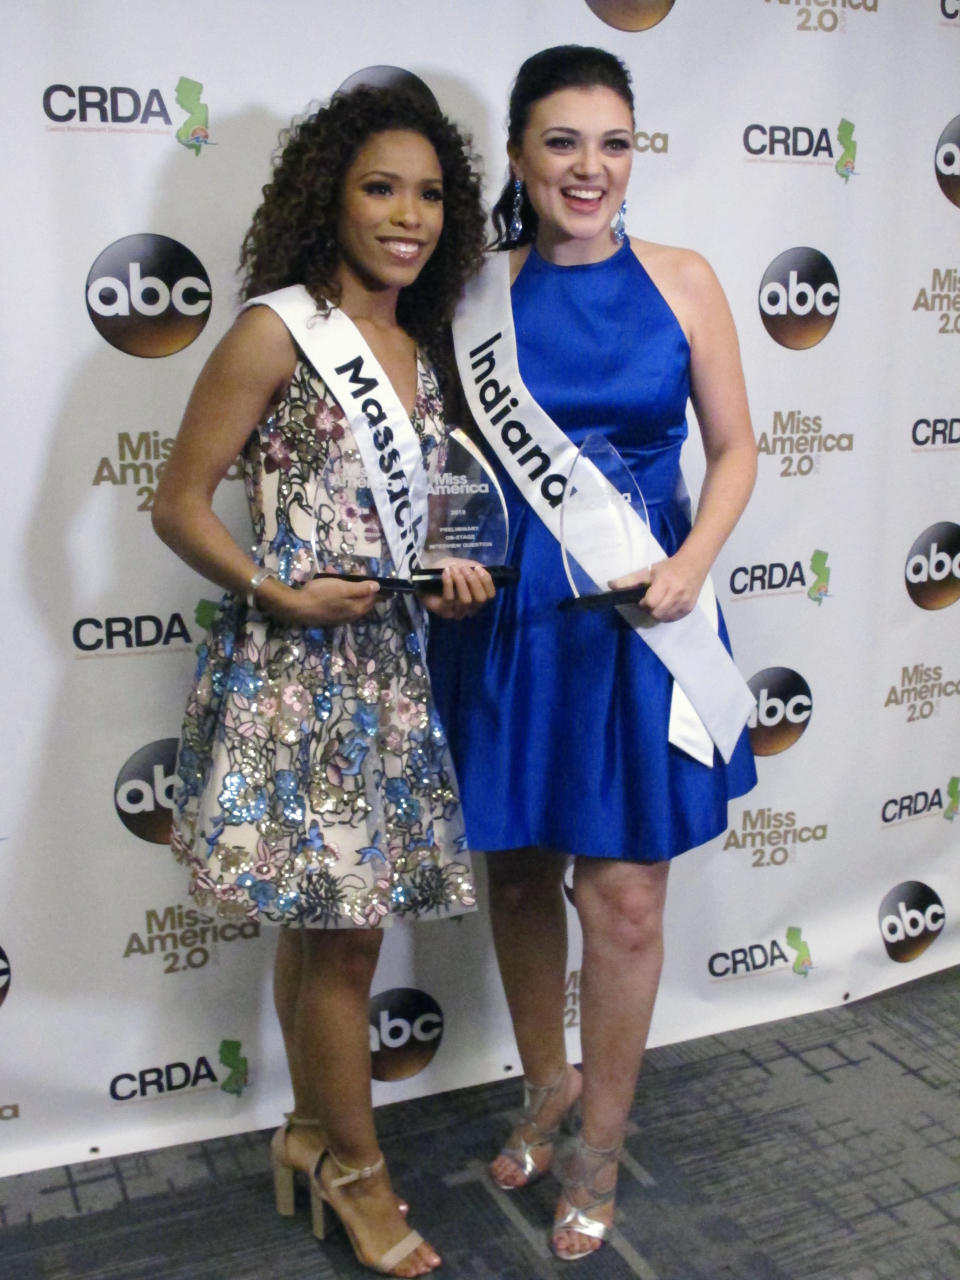 Miss Massachusetts Gabriela Taveras, left, and Miss Indiana Lydia Tremaine pose for photos after winning preliminary competition awards in the Miss America pageant Friday Sept. 7, 2018 in Atlantic City, N.J. Taveras won the onstage interview and Tremaine won the talent portion. (AP Photo/Wayne Parry)